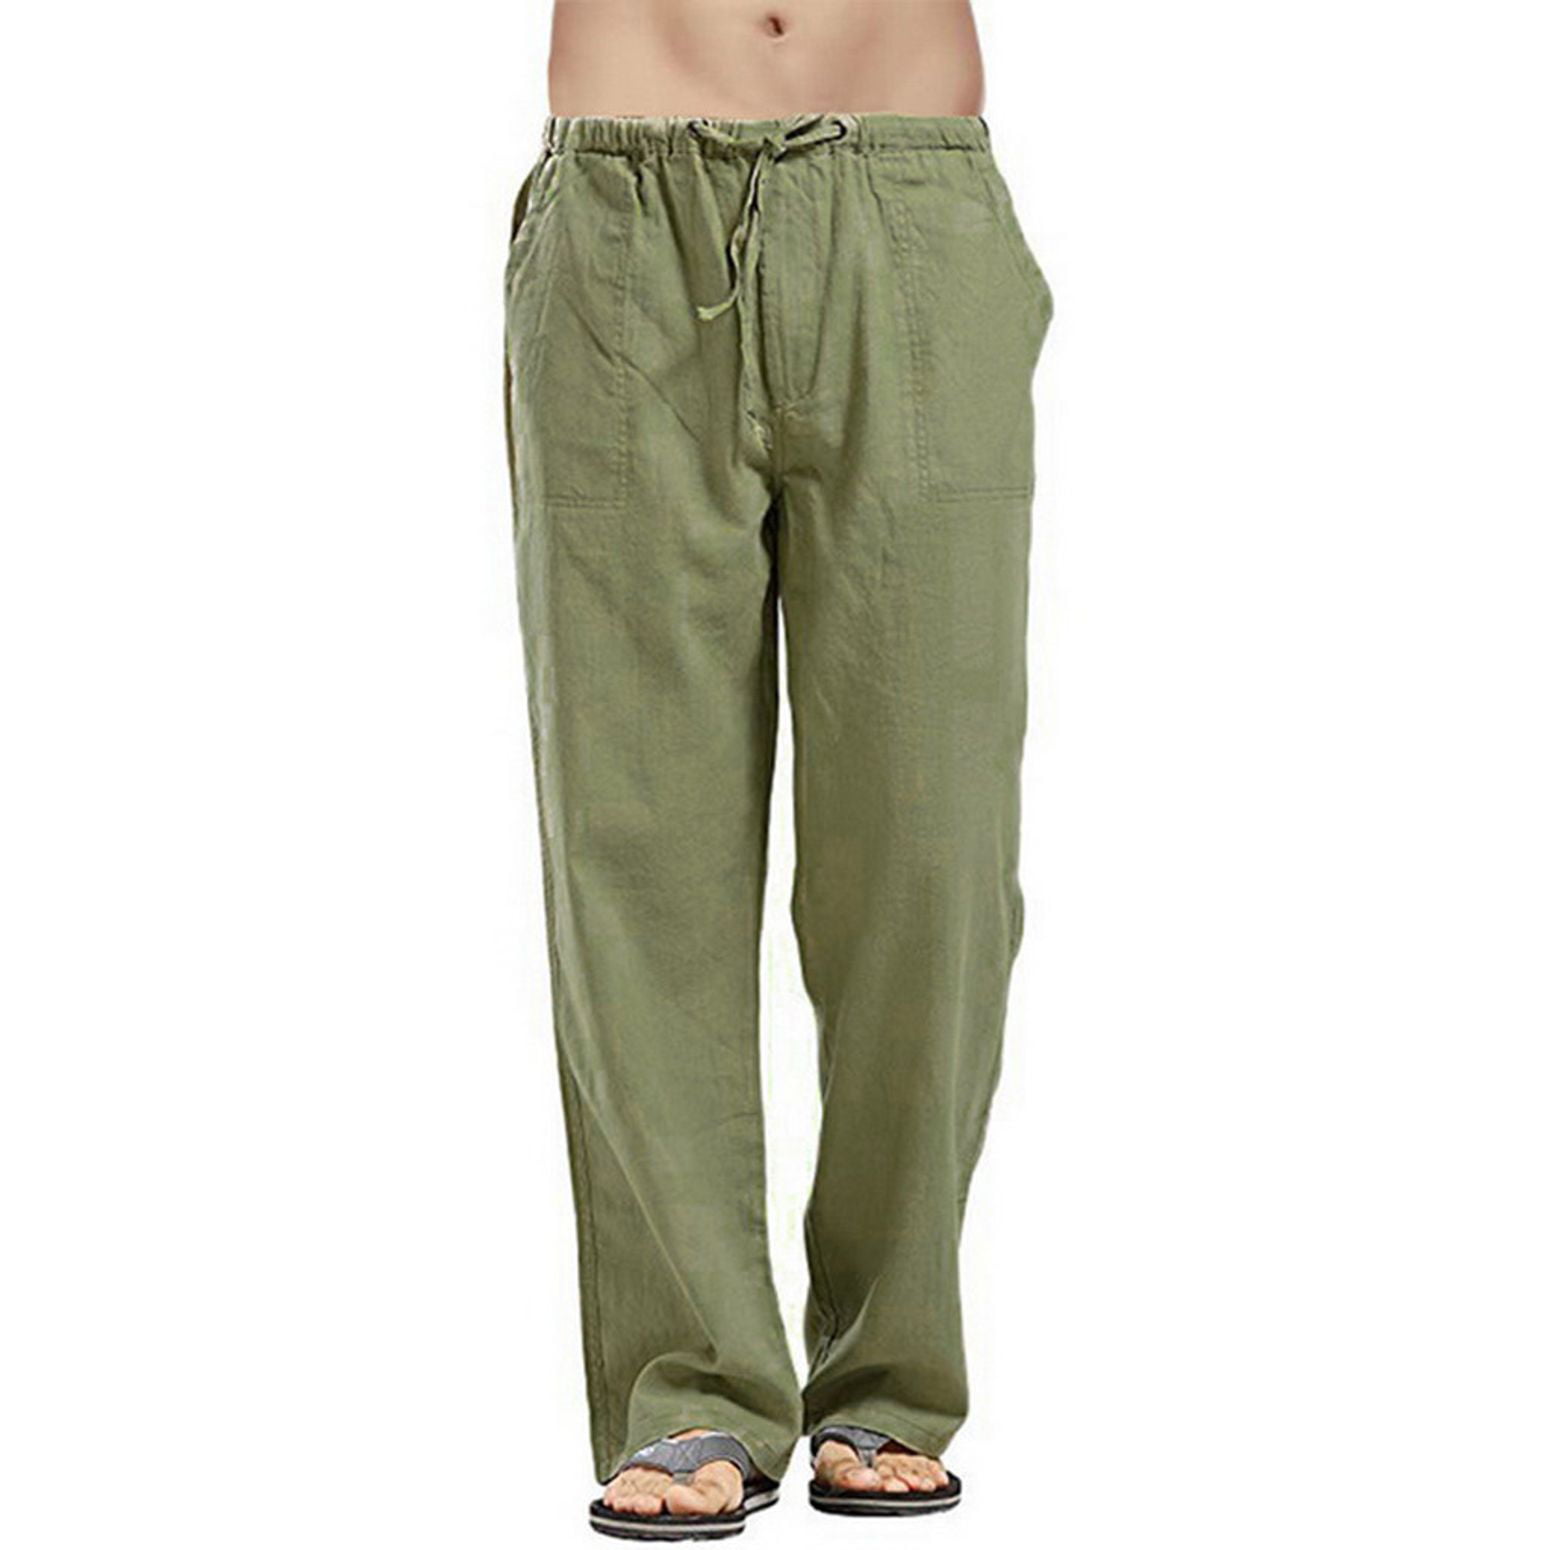 Source Nelson Trouser with Contrasting Trim at Outseam and Double-flap Back  Pockets on m.alibaba.com